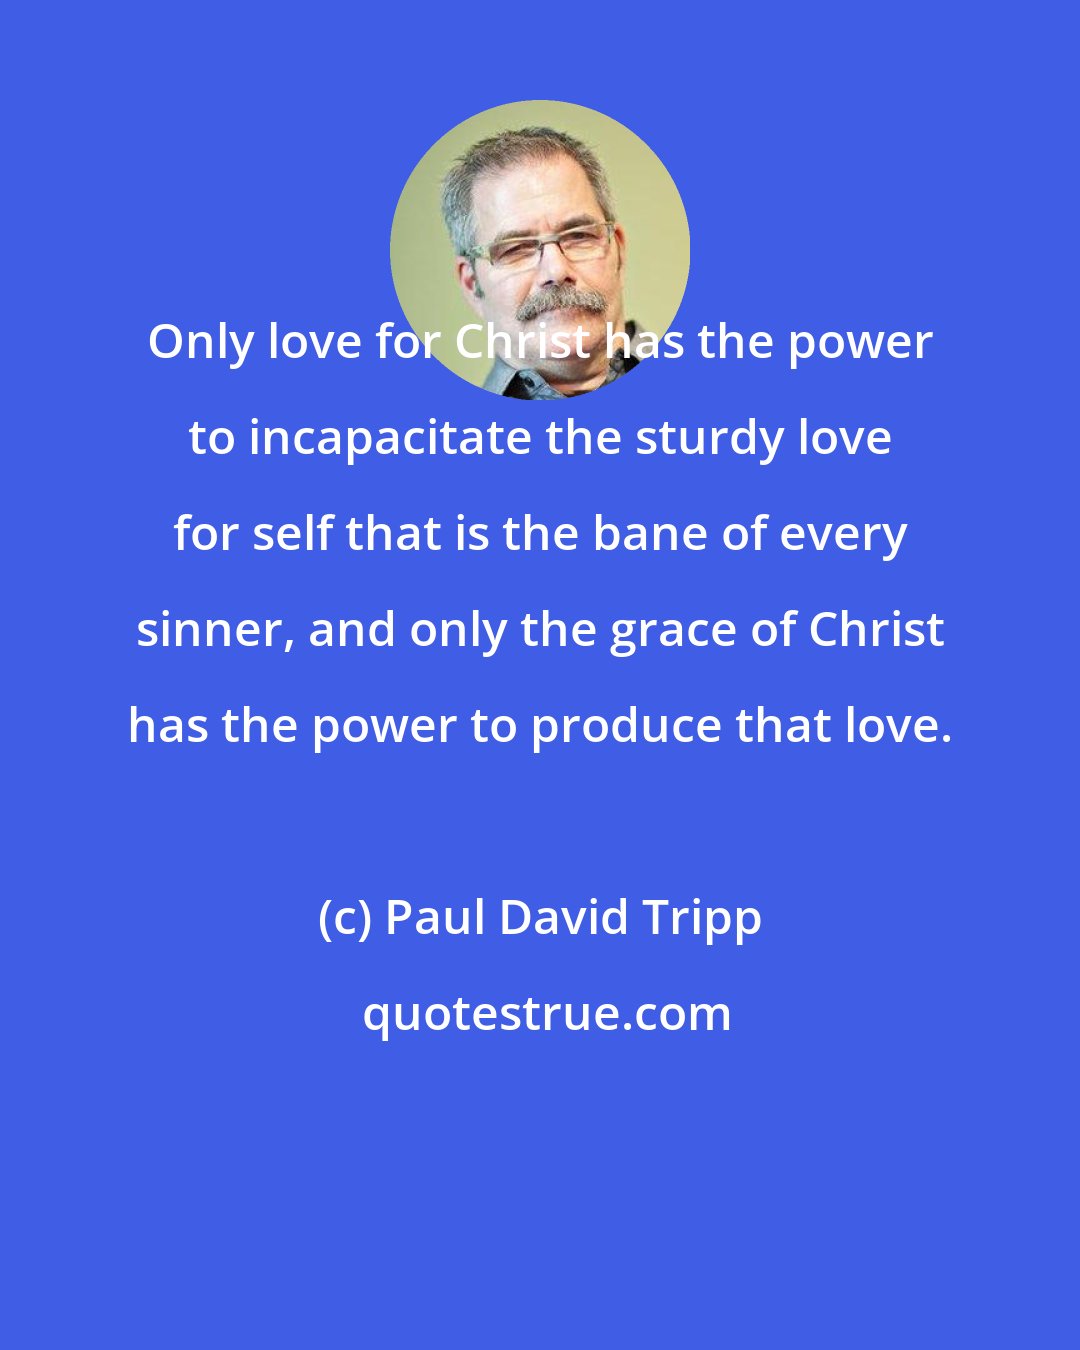 Paul David Tripp: Only love for Christ has the power to incapacitate the sturdy love for self that is the bane of every sinner, and only the grace of Christ has the power to produce that love.